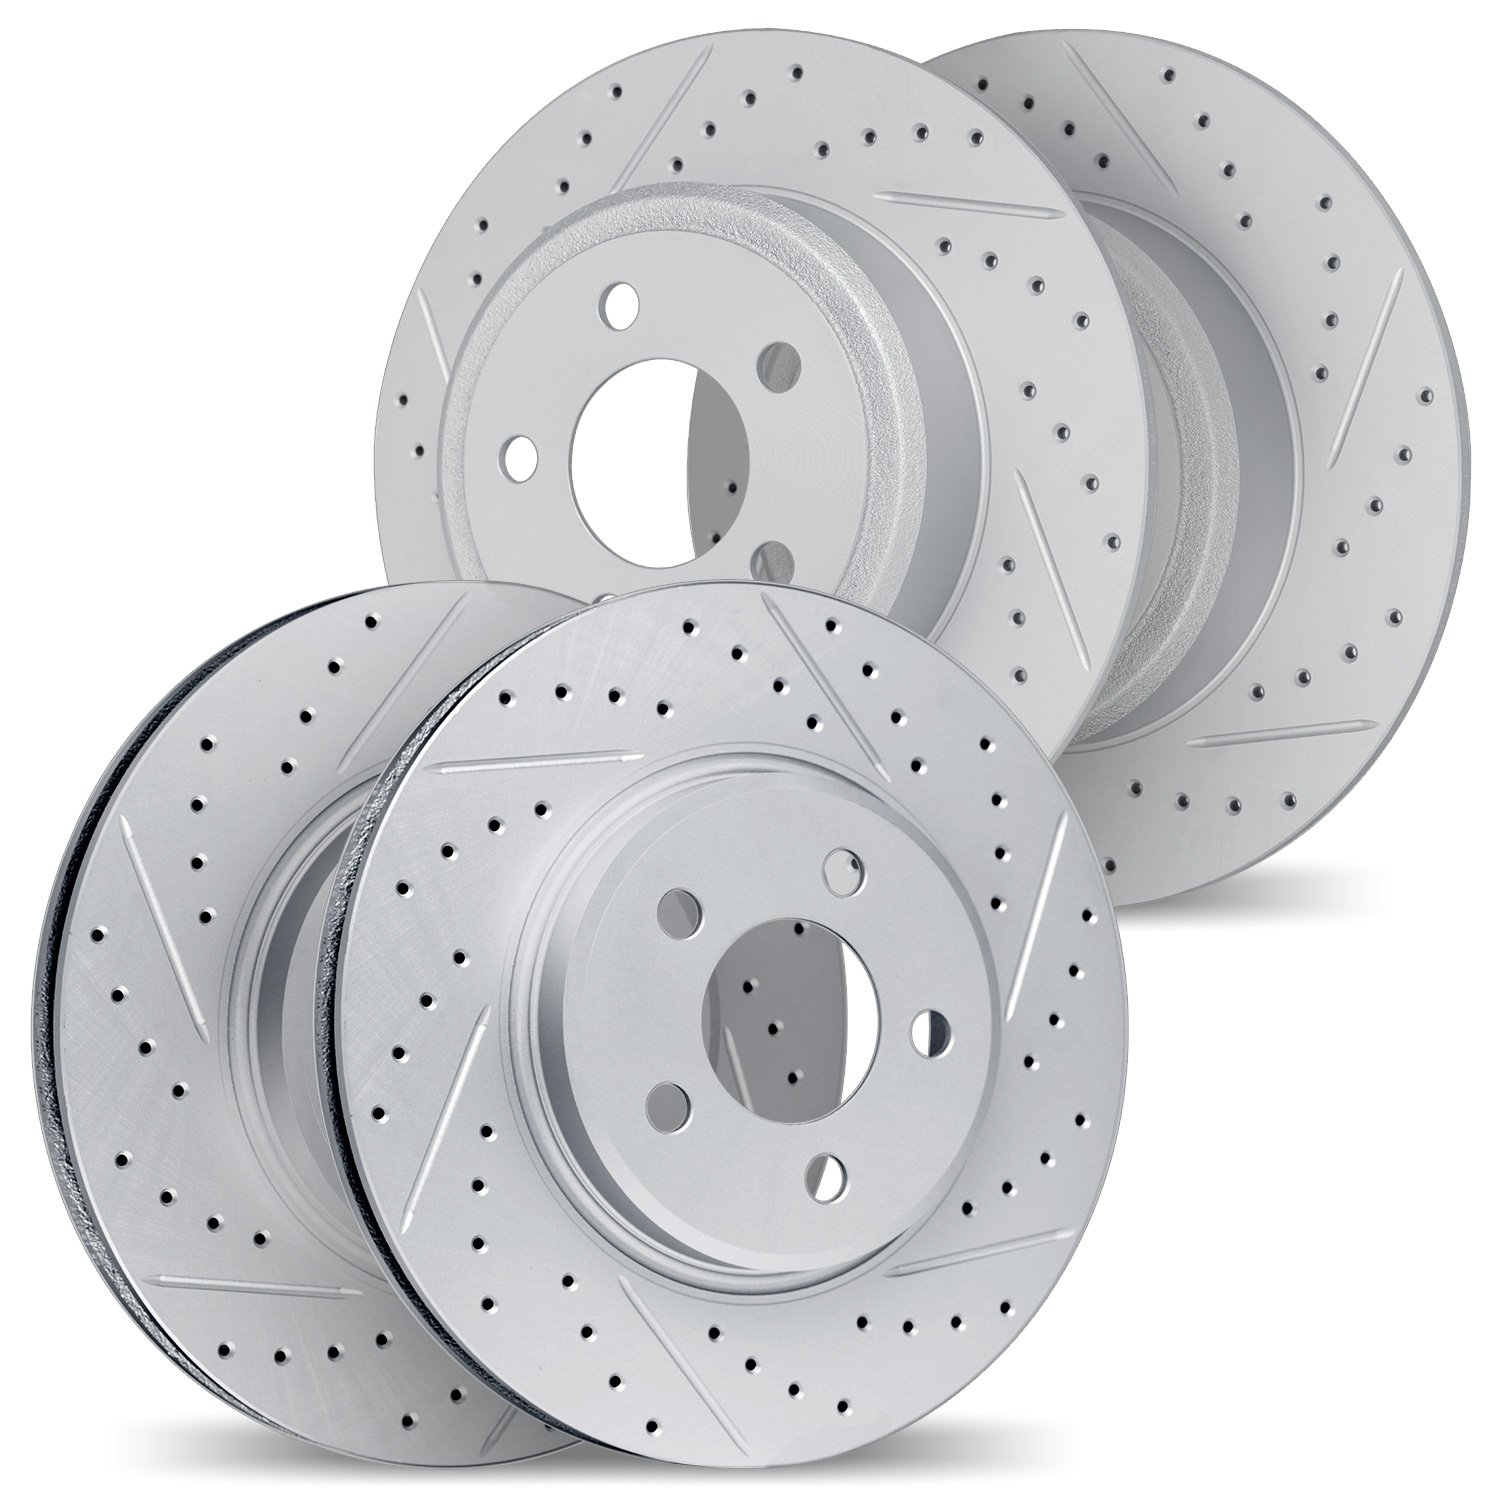 2004-13001 Geoperformance Drilled/Slotted Brake Rotors, 1996-2007 GM, Position: Front and Rear